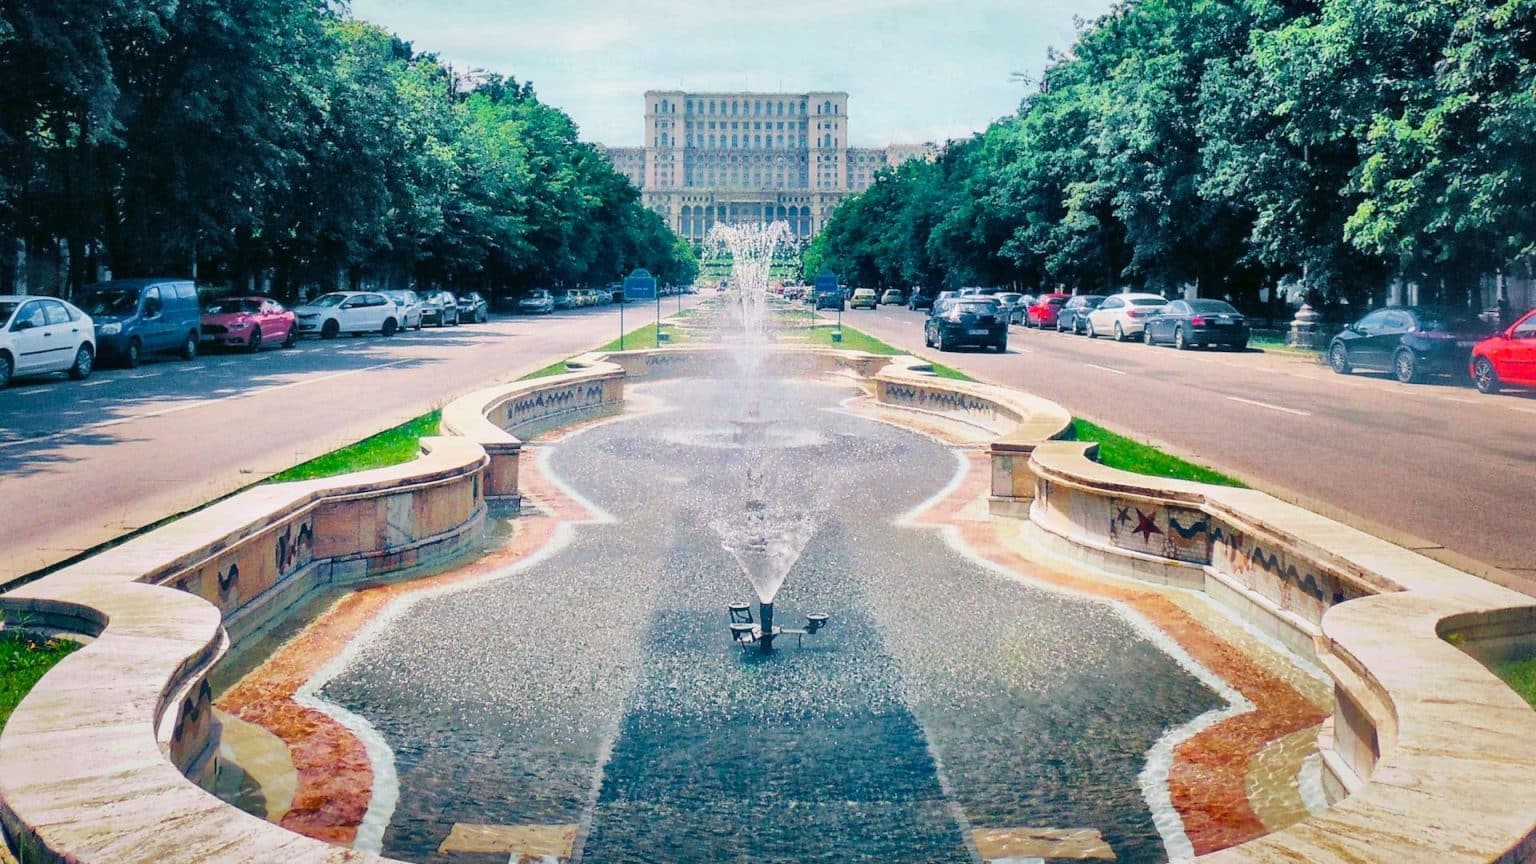 Located In The Heart Of The City Unirii Boulevard And The Parliament Building Area Are Among The Best Locations In Bucharest For Tourists Edited 1536x864 